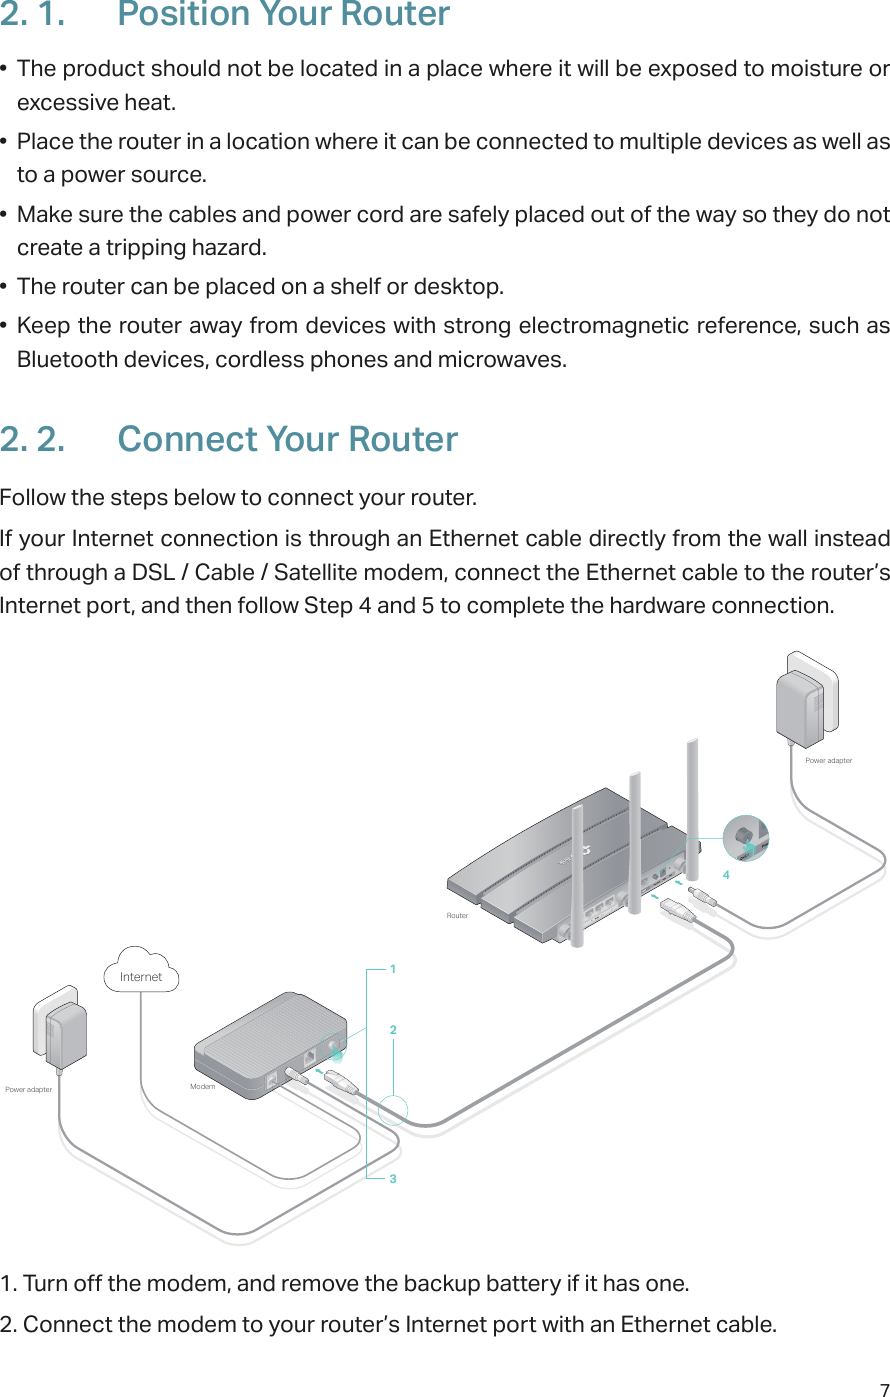 72. 1.  Position Your Router•  The product should not be located in a place where it will be exposed to moisture or excessive heat.•  Place the router in a location where it can be connected to multiple devices as well as to a power source.•  Make sure the cables and power cord are safely placed out of the way so they do not create a tripping hazard.•  The router can be placed on a shelf or desktop.•  Keep the router away from devices with strong electromagnetic reference, such as Bluetooth devices, cordless phones and microwaves.2. 2.  Connect Your RouterFollow the steps below to connect your router.If your Internet connection is through an Ethernet cable directly from the wall instead of through a DSL / Cable / Satellite modem, connect the Ethernet cable to the router’s Internet port, and then follow Step 4 and 5 to complete the hardware connection.ModemPower adapterPower adapterRouterInternet 13421. Turn off the modem, and remove the backup battery if it has one.2. Connect the modem to your router’s Internet port with an Ethernet cable.